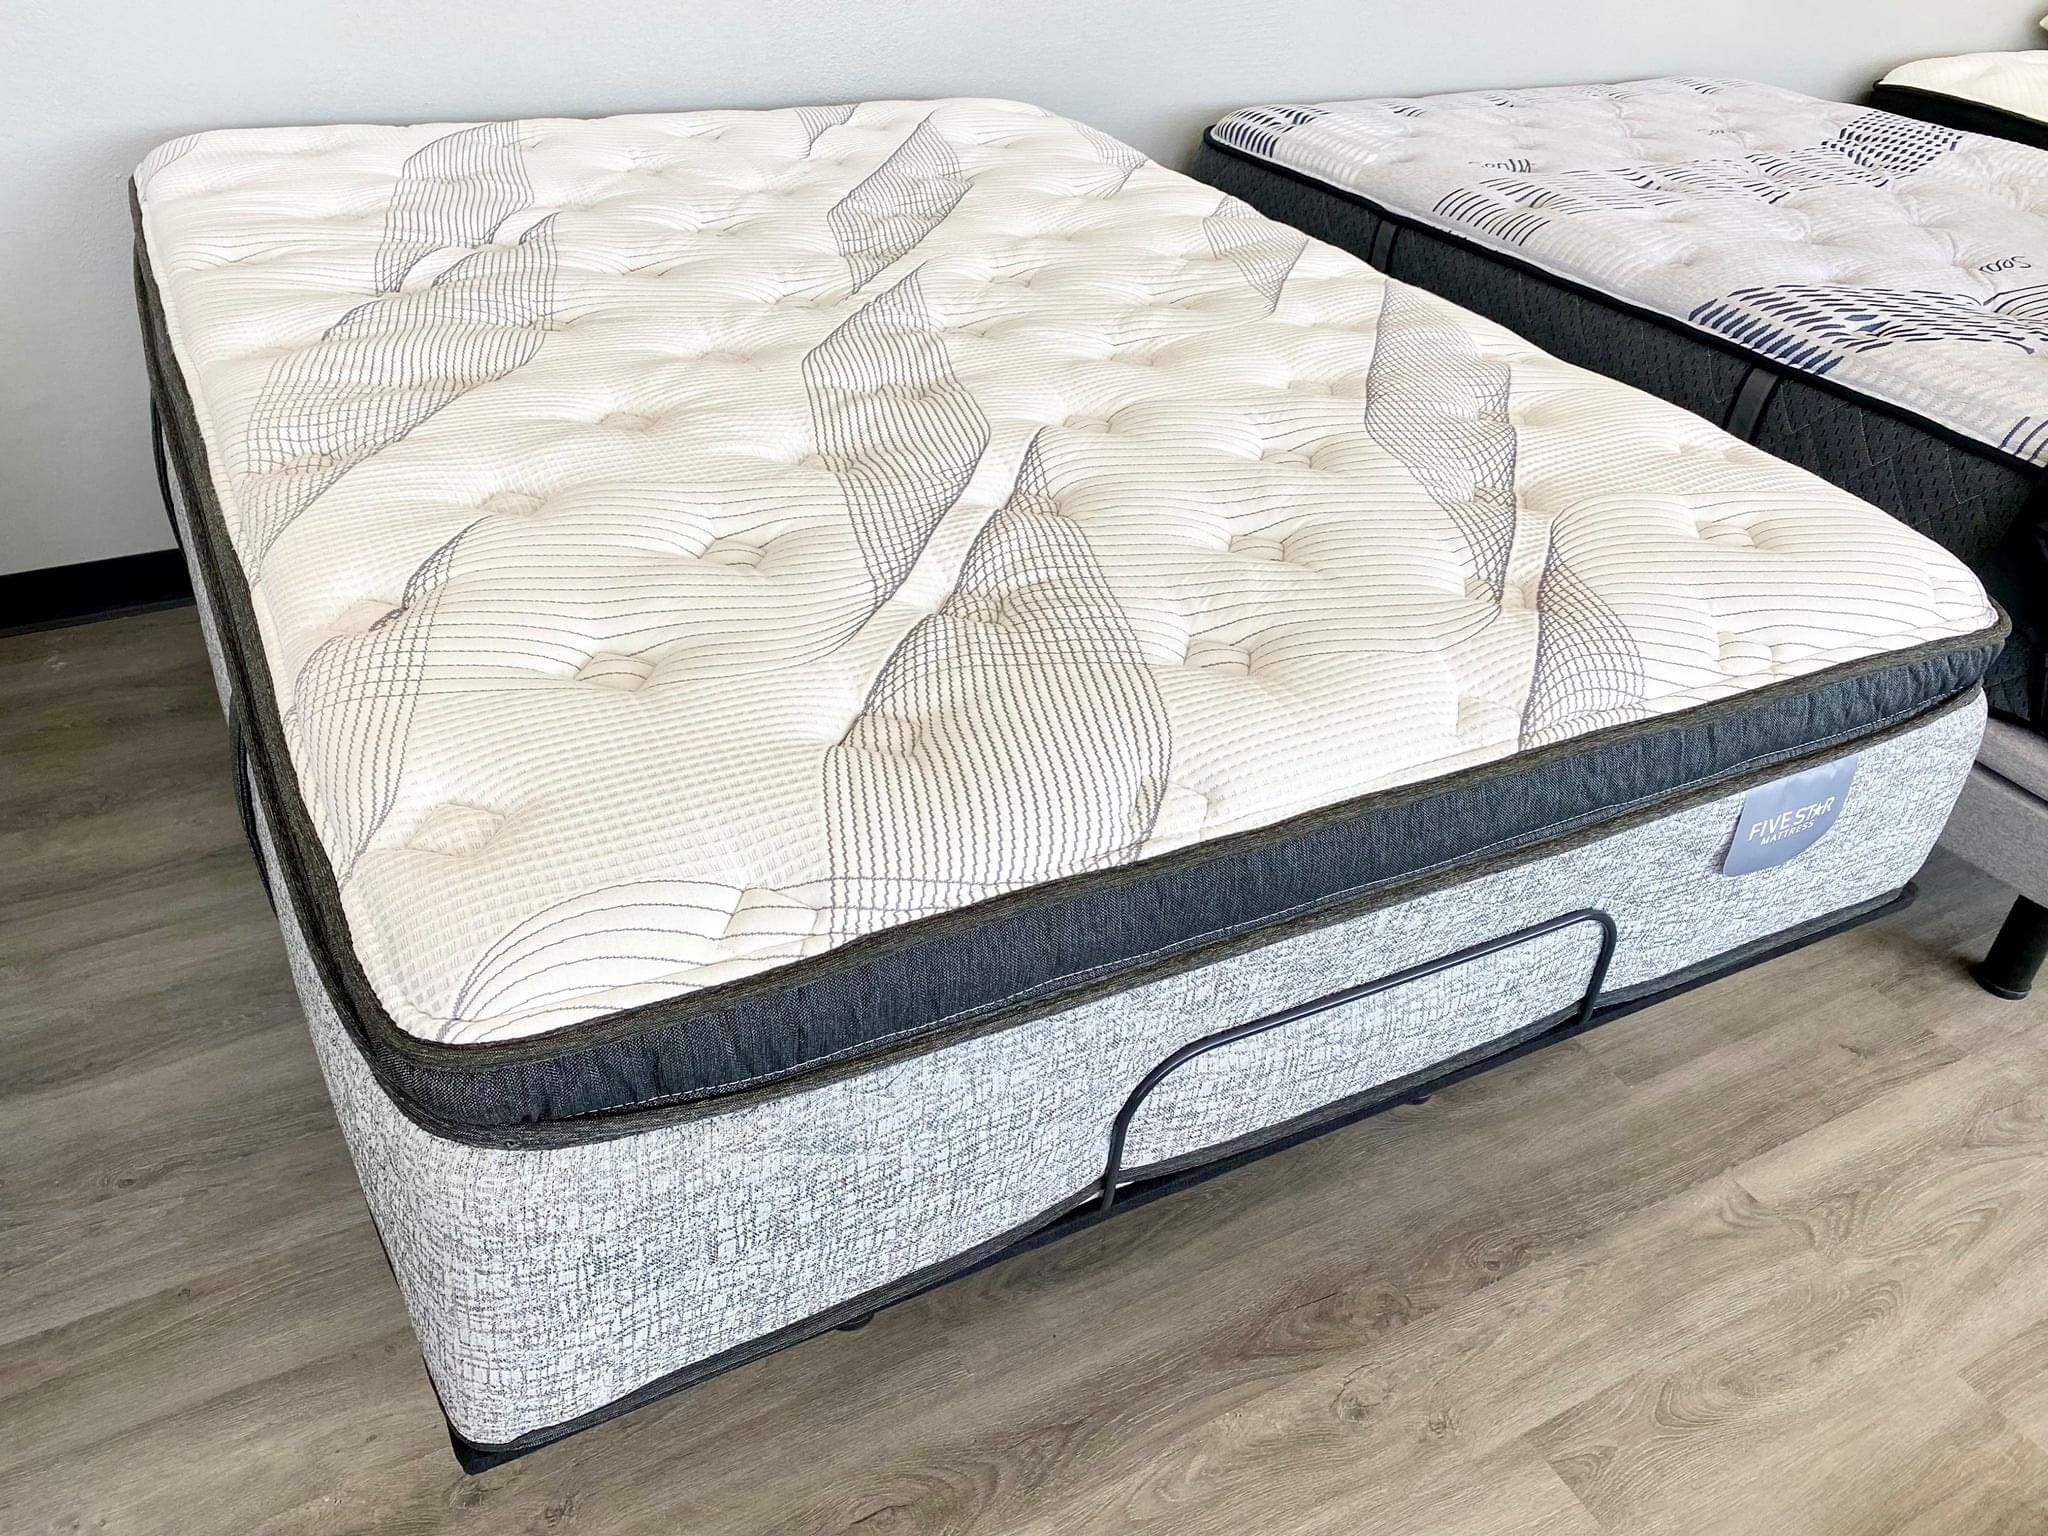 Brand New Mattress Sale! 50-80% OFF! Limited Time Grand Opening Sale!